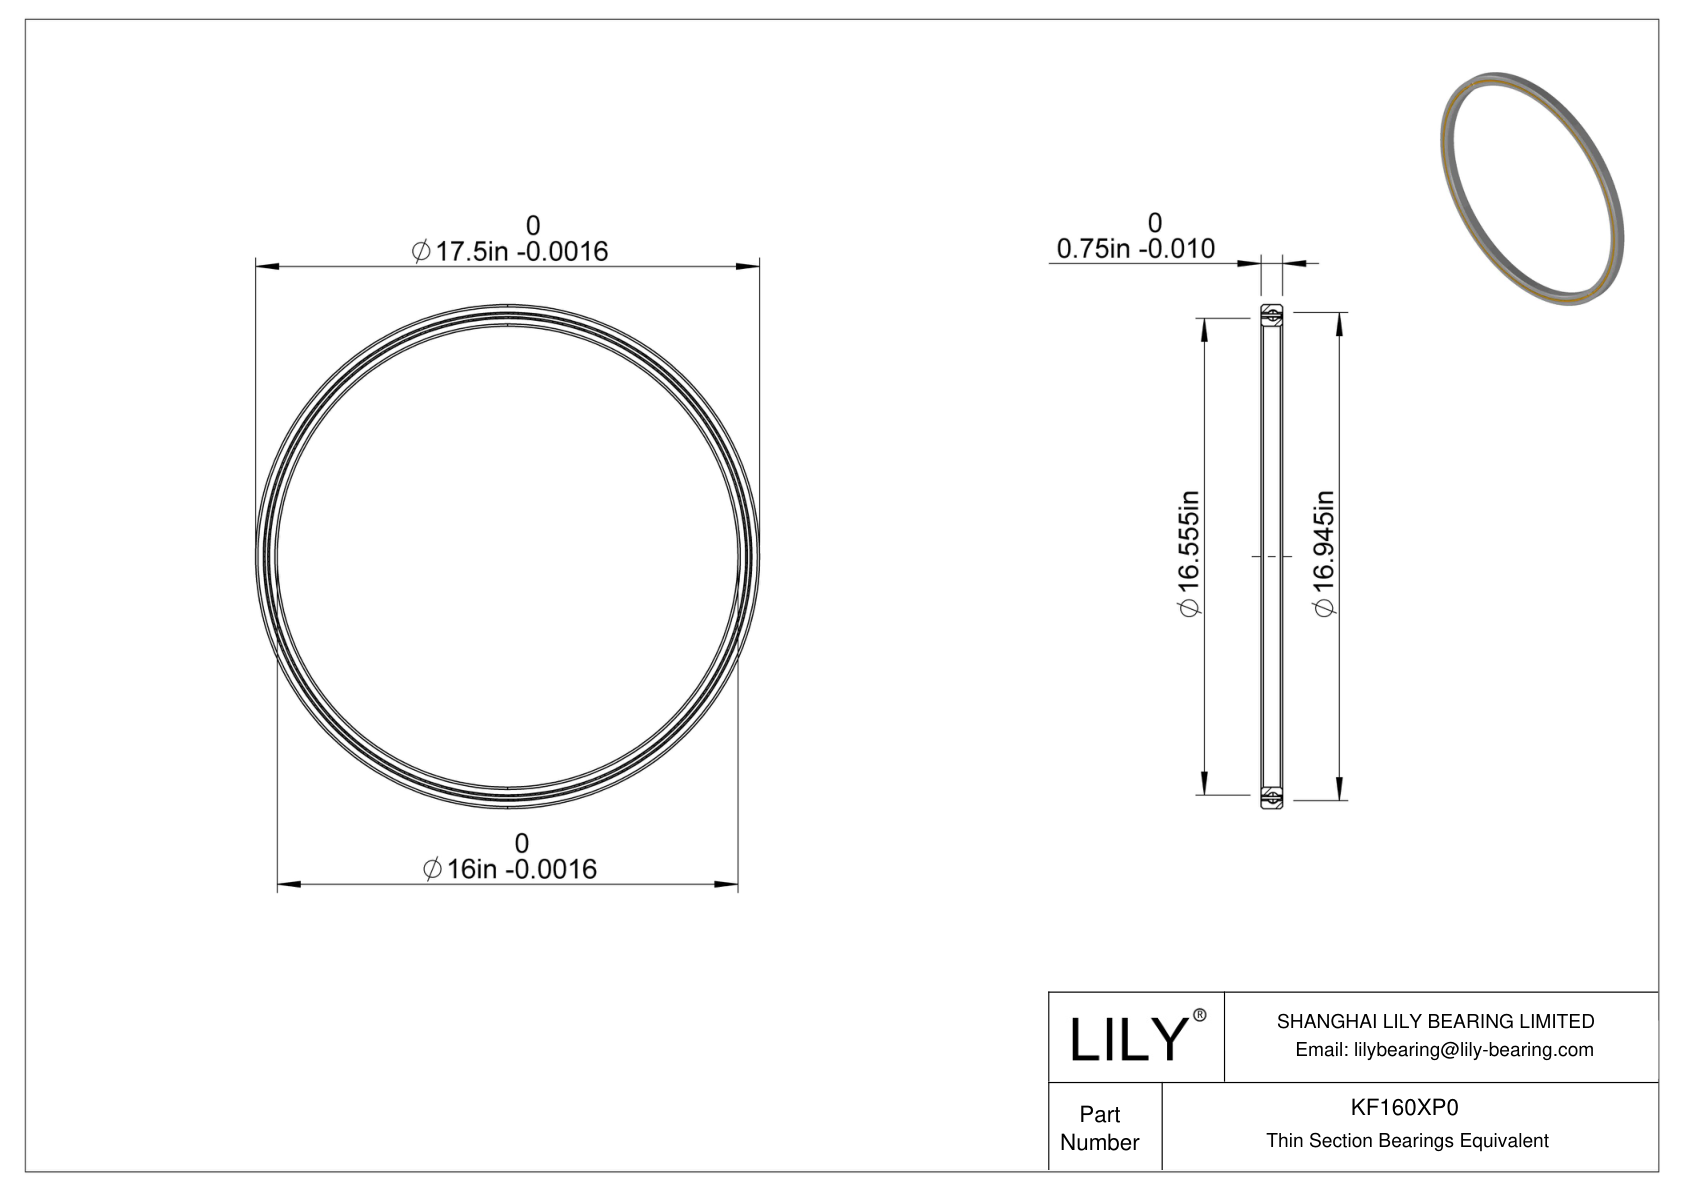 KF160XP0 Constant Section (CS) Bearings cad drawing